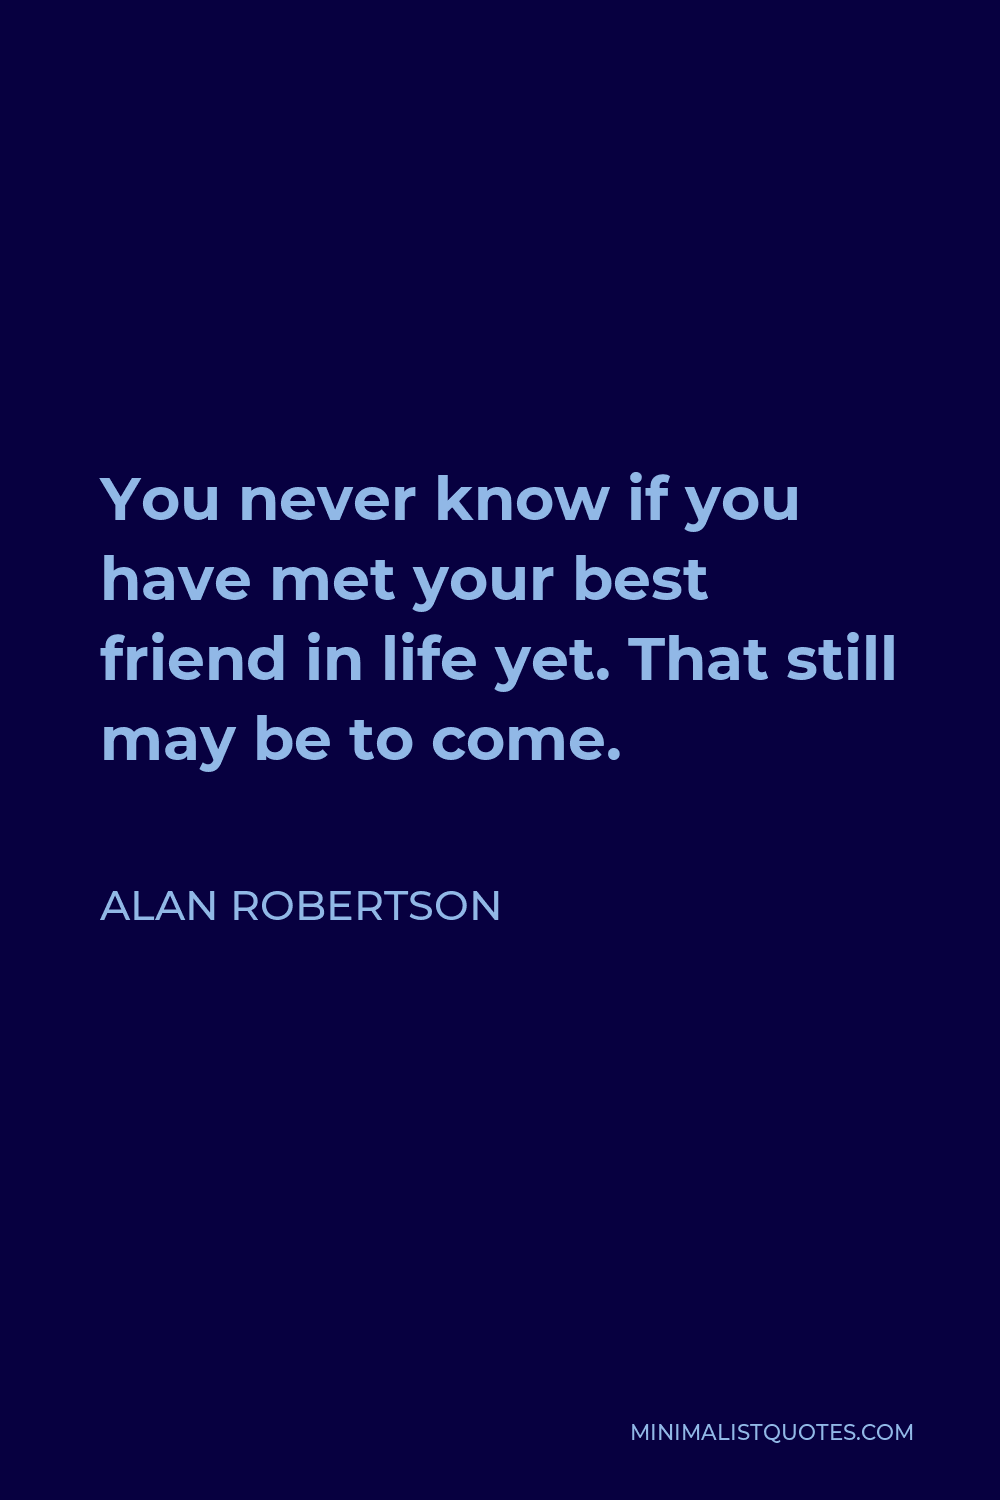 Alan Robertson Quote - You never know if you have met your best friend in life yet. That still may be to come.